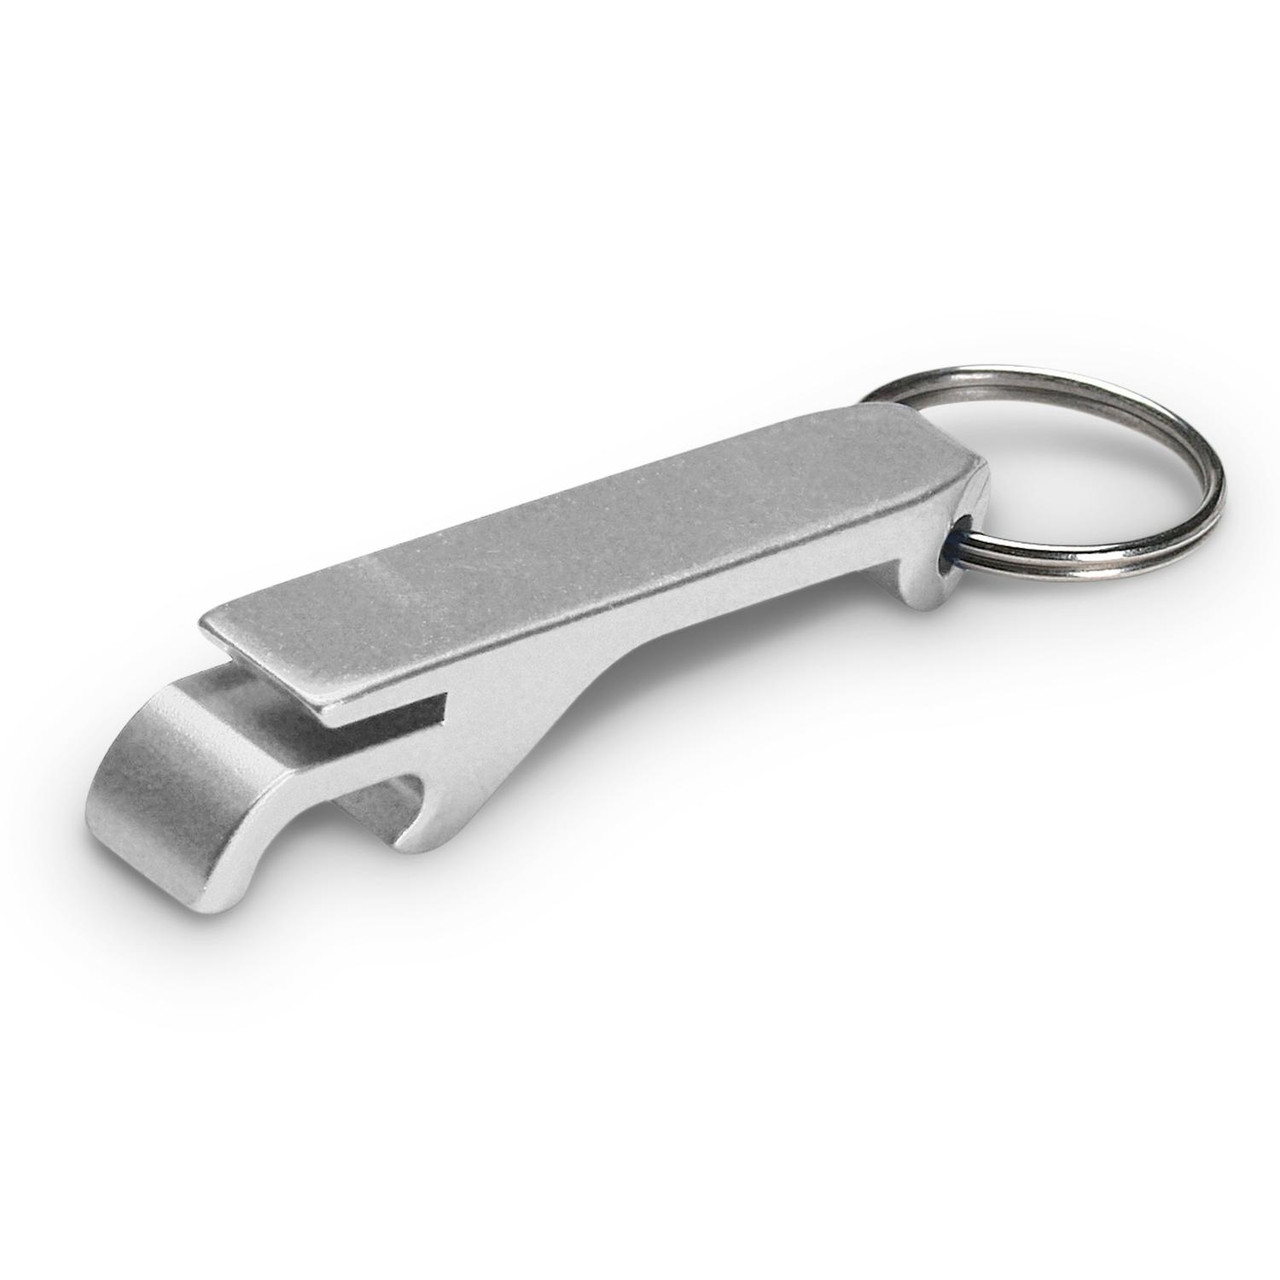 Key ring double ring stainless steel flat open key ring pull ring 15-38mm